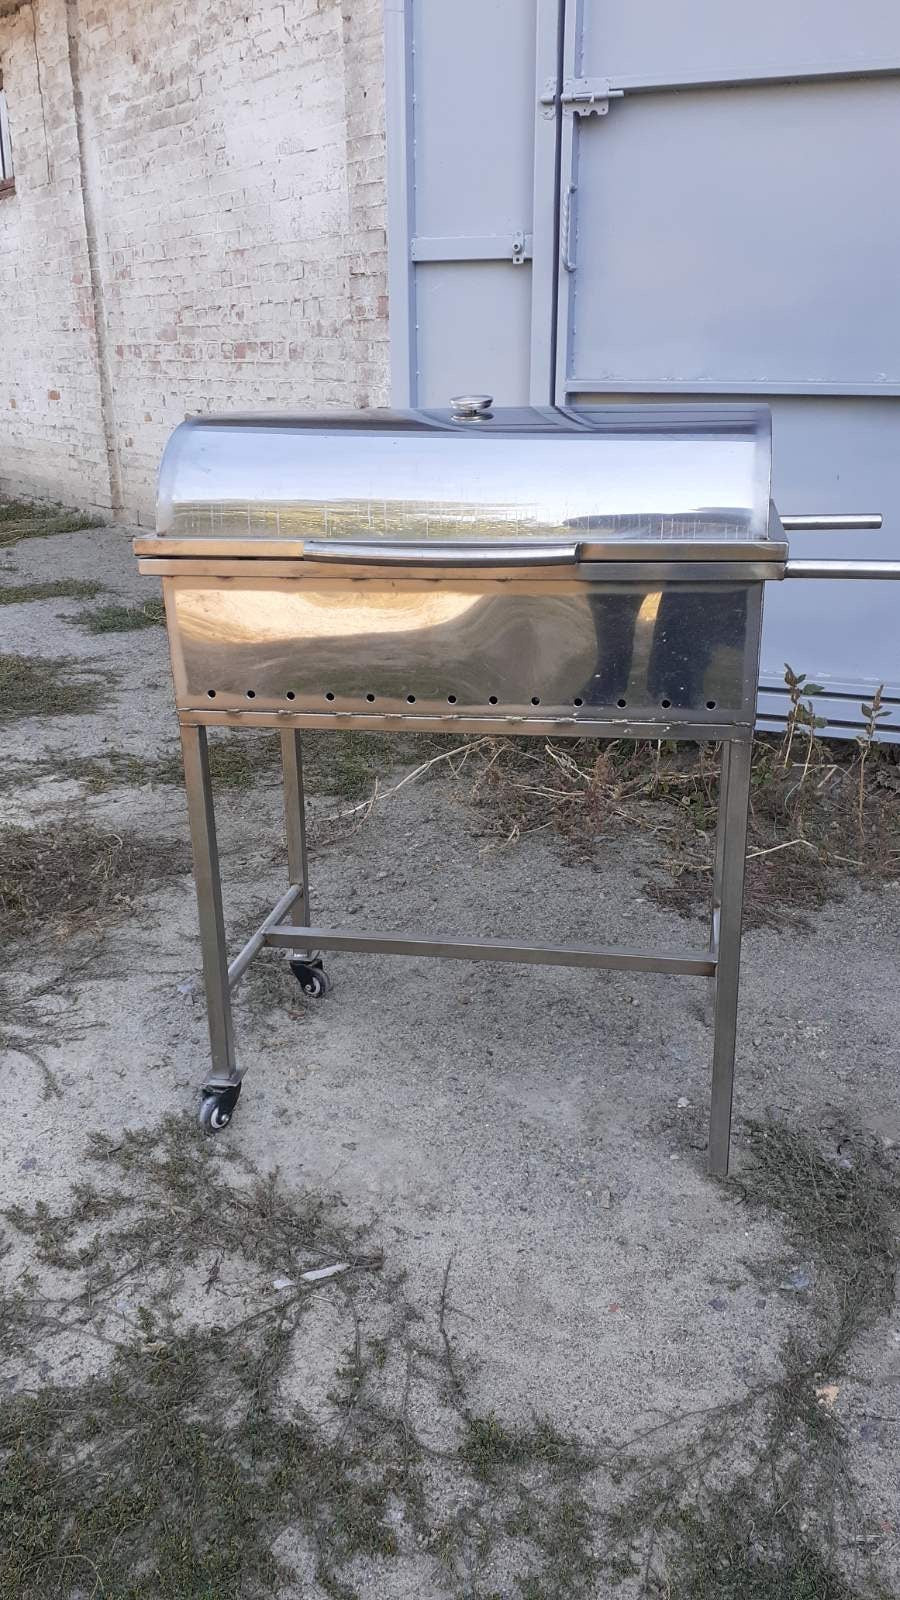 Grill, mangal, BBQ, camping, cooking equipment, bushcraft, stainless steel, fire pit, portable grill, camping fire pit,camping cooking grill